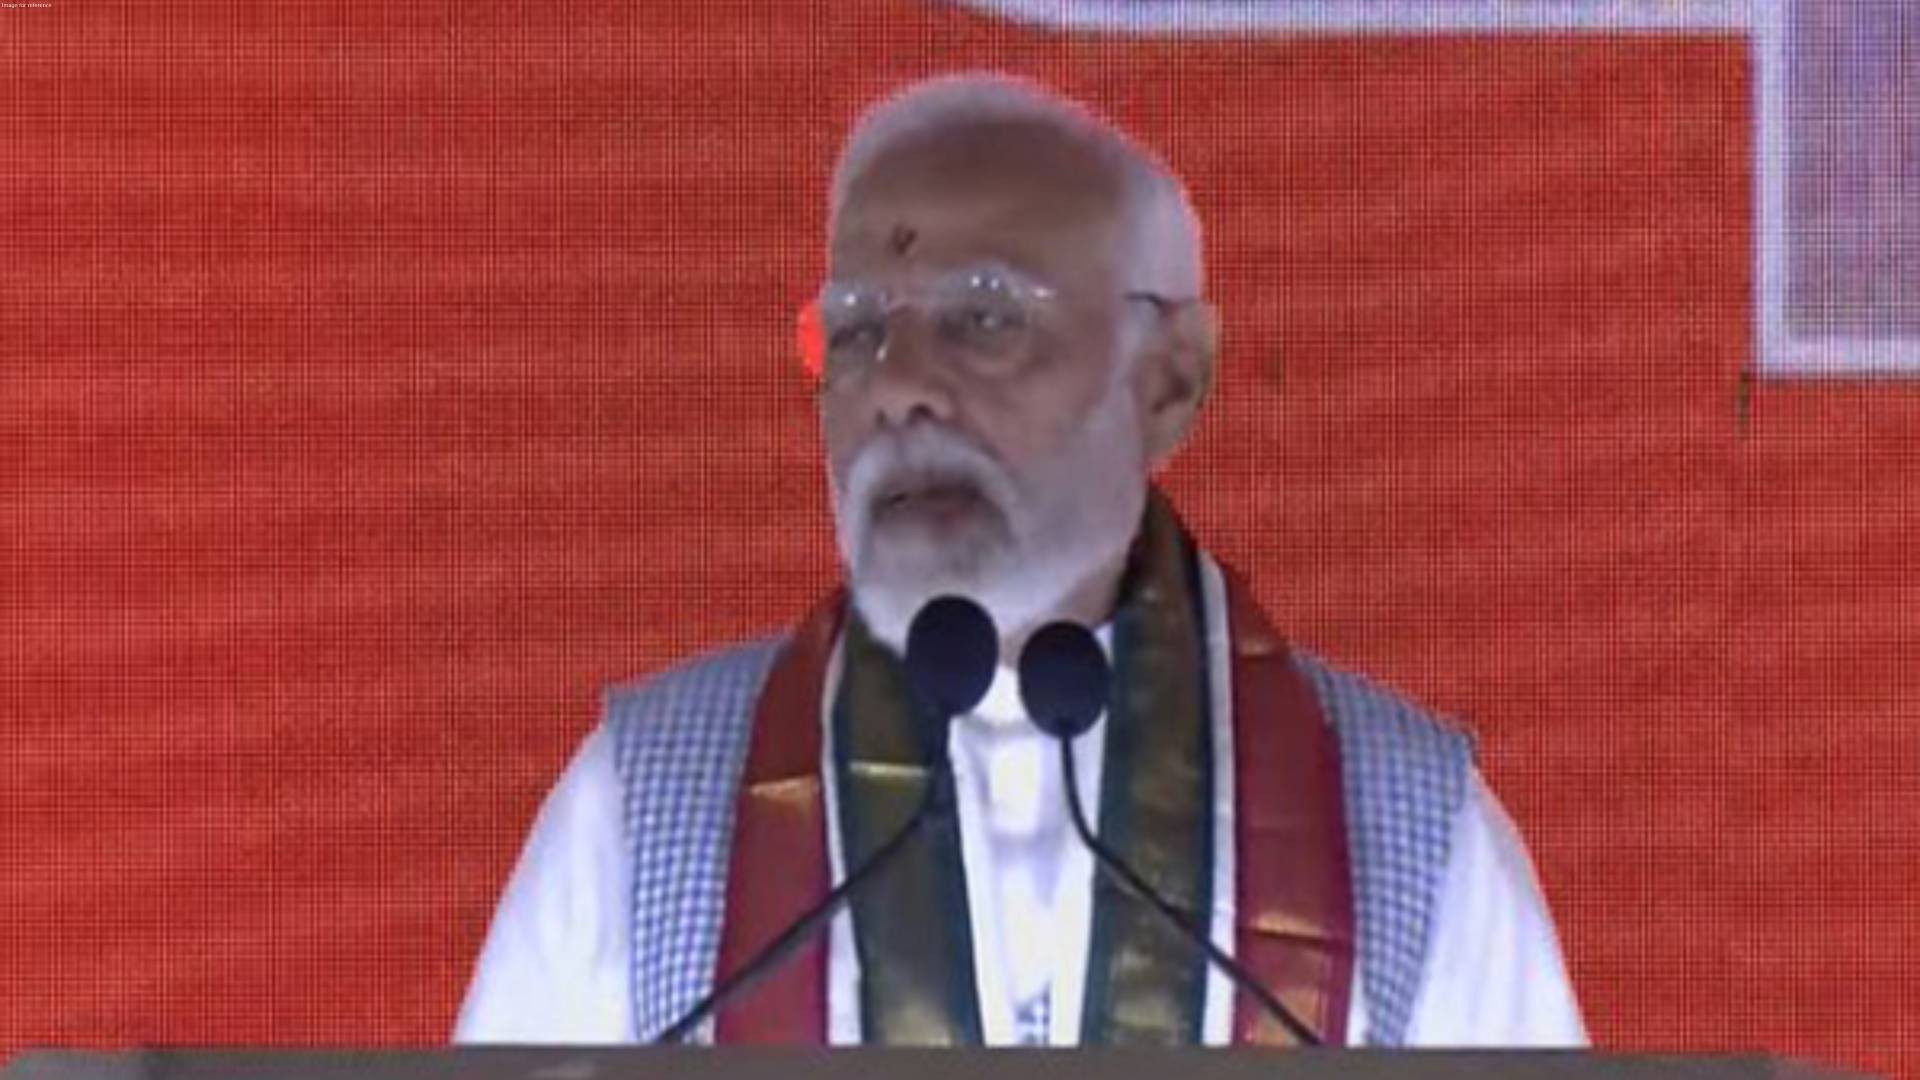 Telangana is called the Gateway for South India: PM Modi